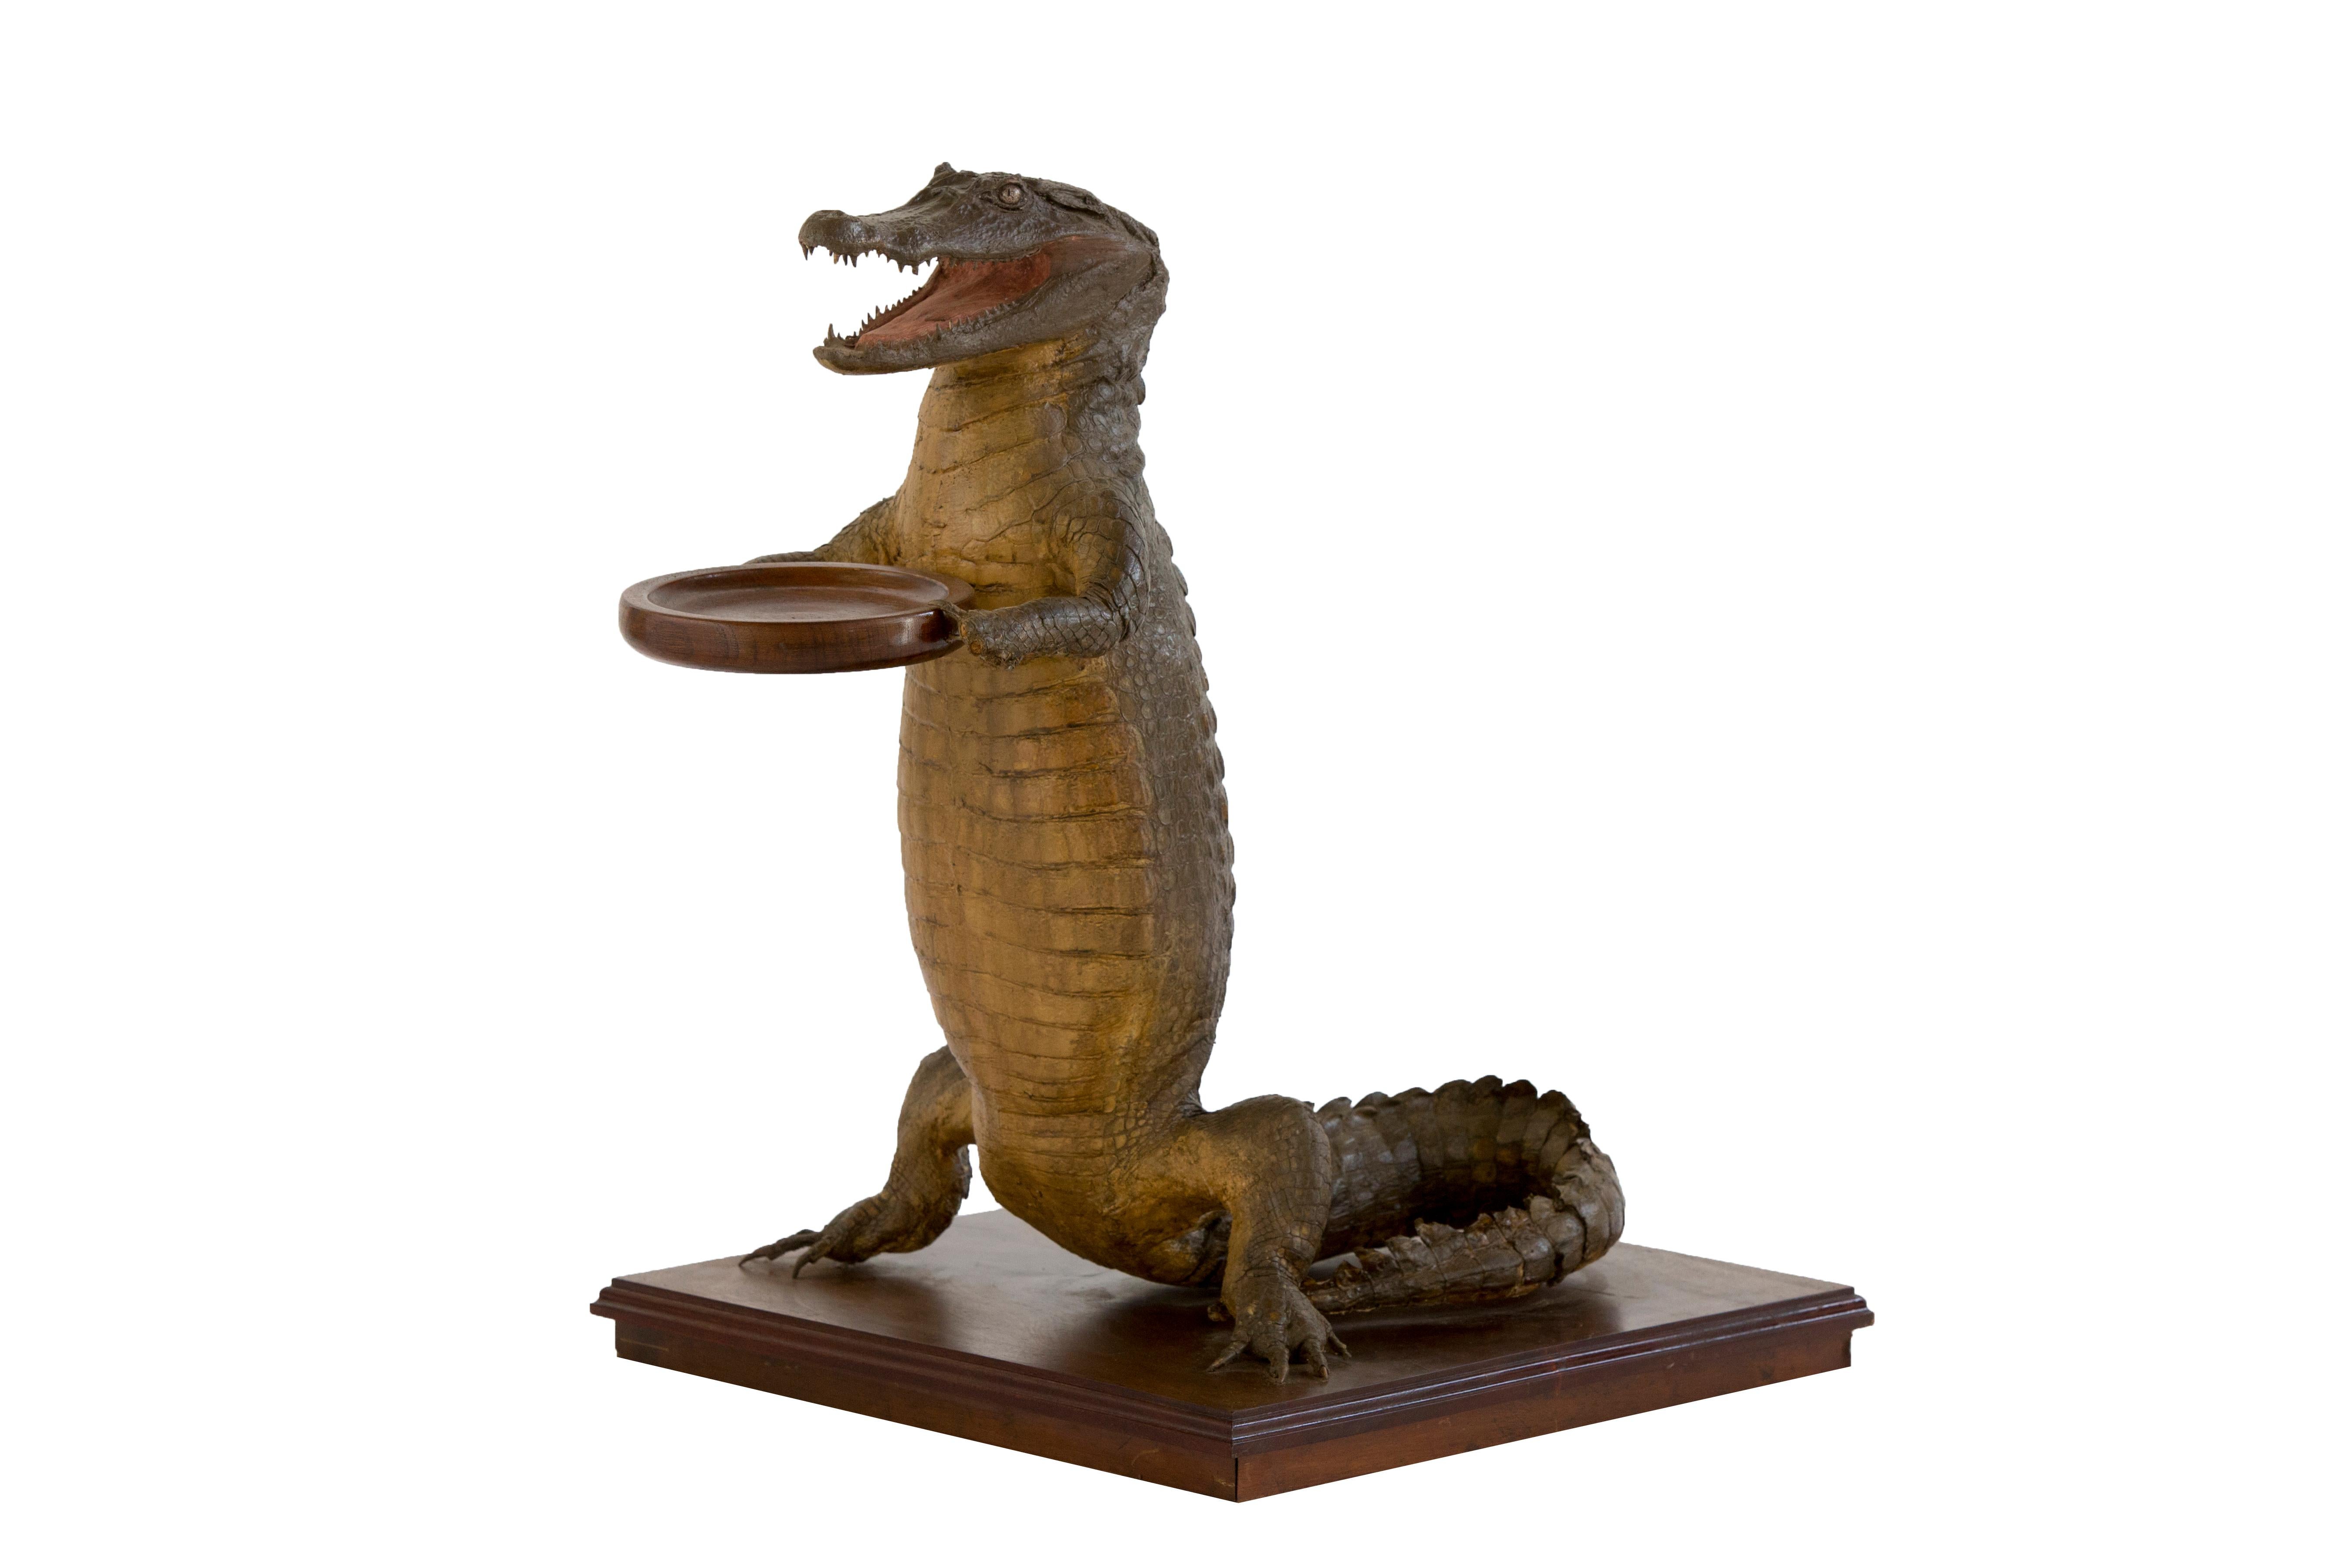 These amusing Victorian taxidermy studies of crocodiles holding card trays are rare classics of the late 19th century when there was in interest in all aspects of the natural world. They are shown in this whimsical manner as a waiter.

*Further